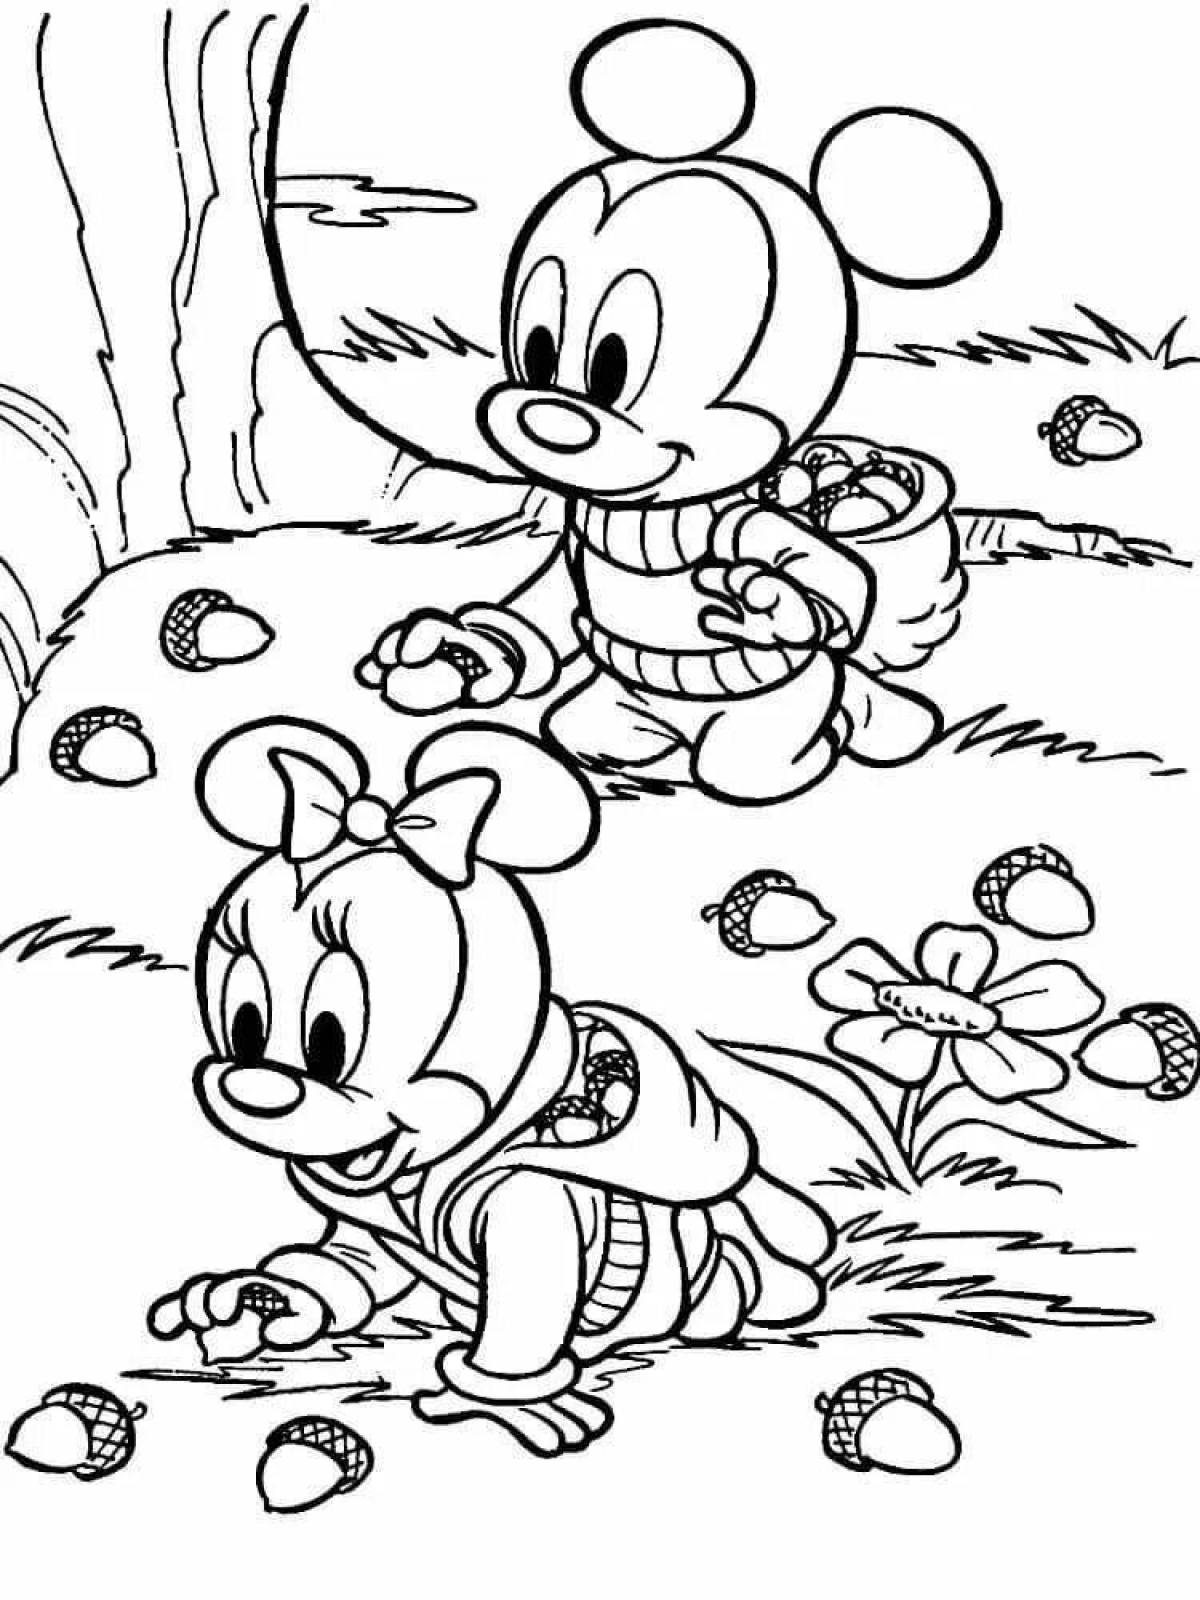 Exciting coloring book for cartoon children 5-6 years old